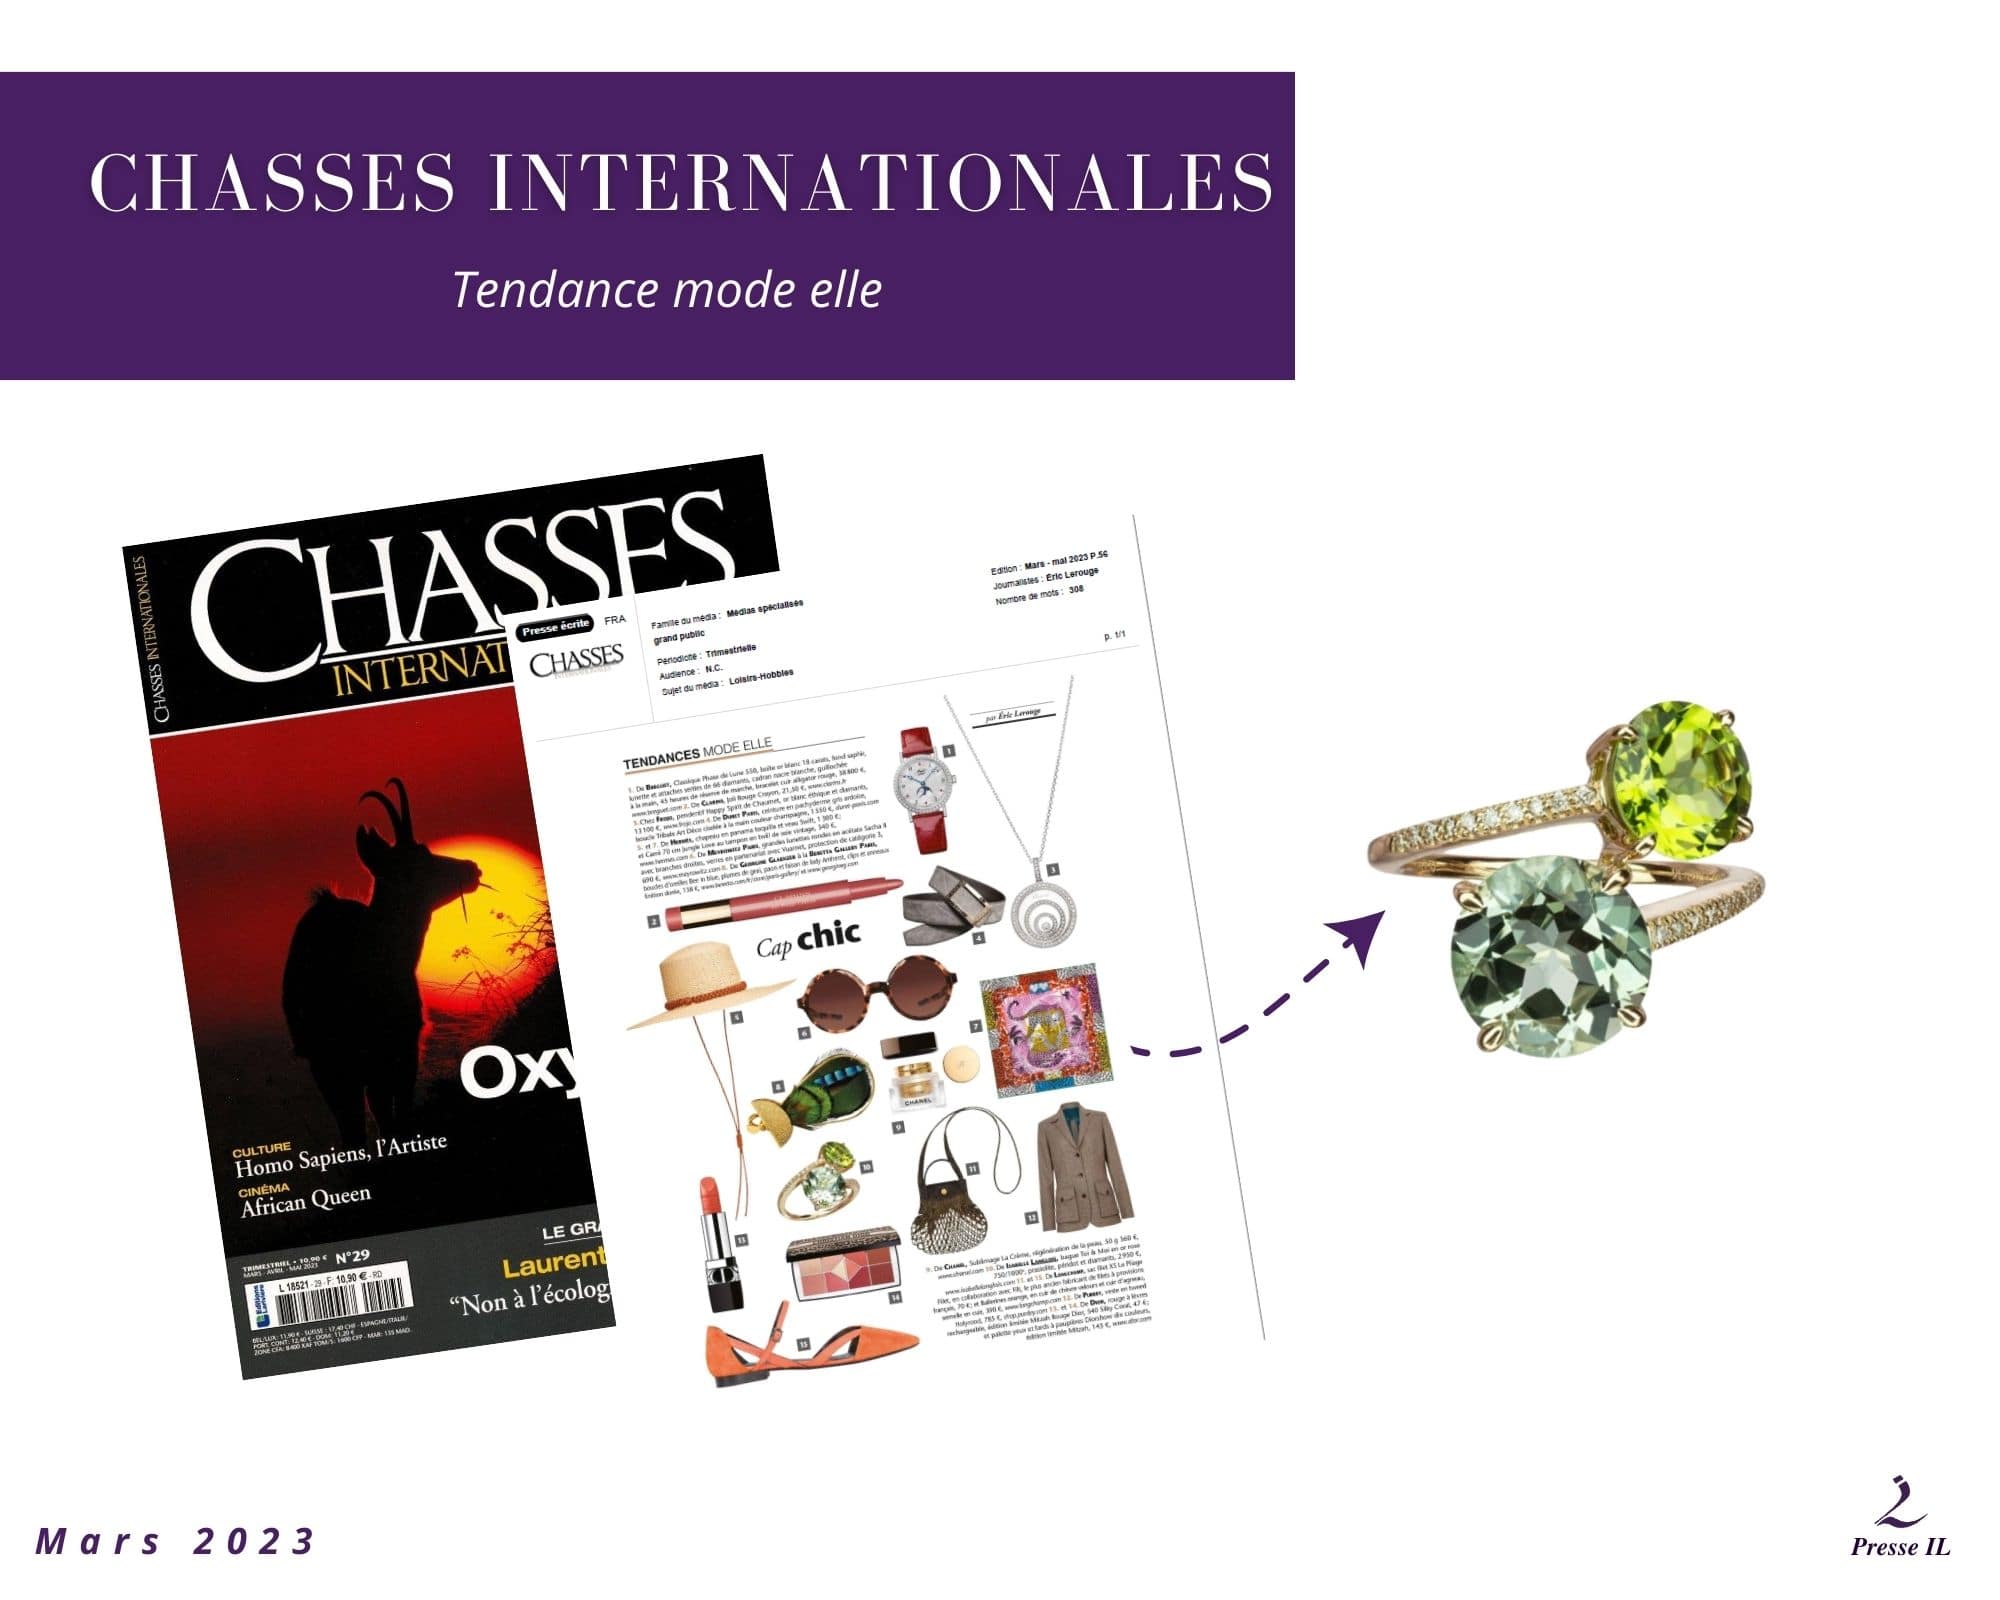 CHASSES INTERNATIONALES (3)